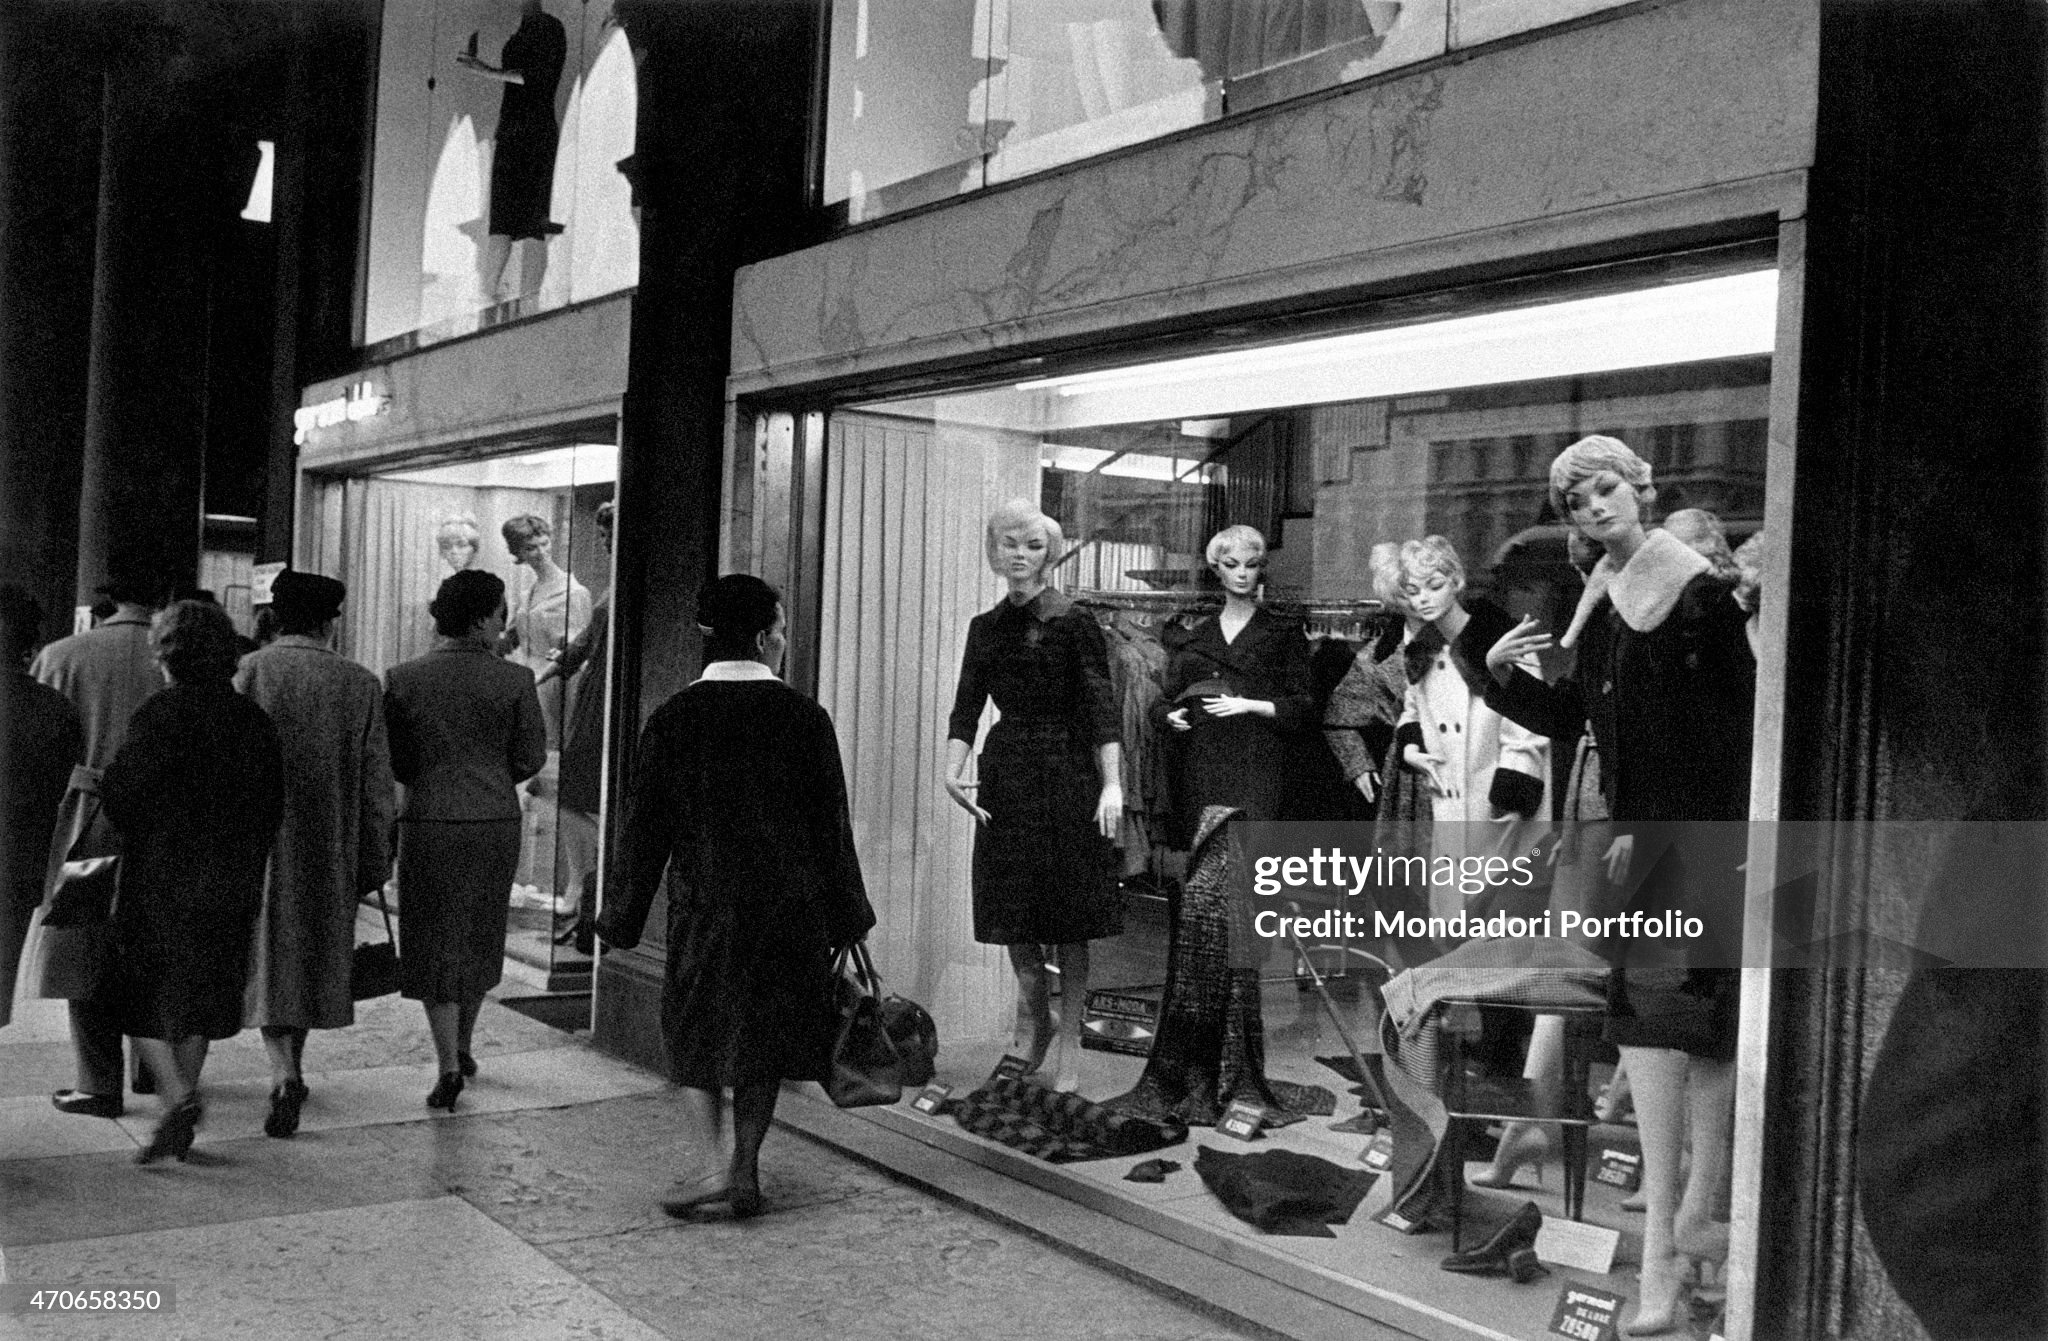 Women having a stroll catch a glimpse of the dummies exposed in a clothing store window display in Milan, Italy, in October 1960. 